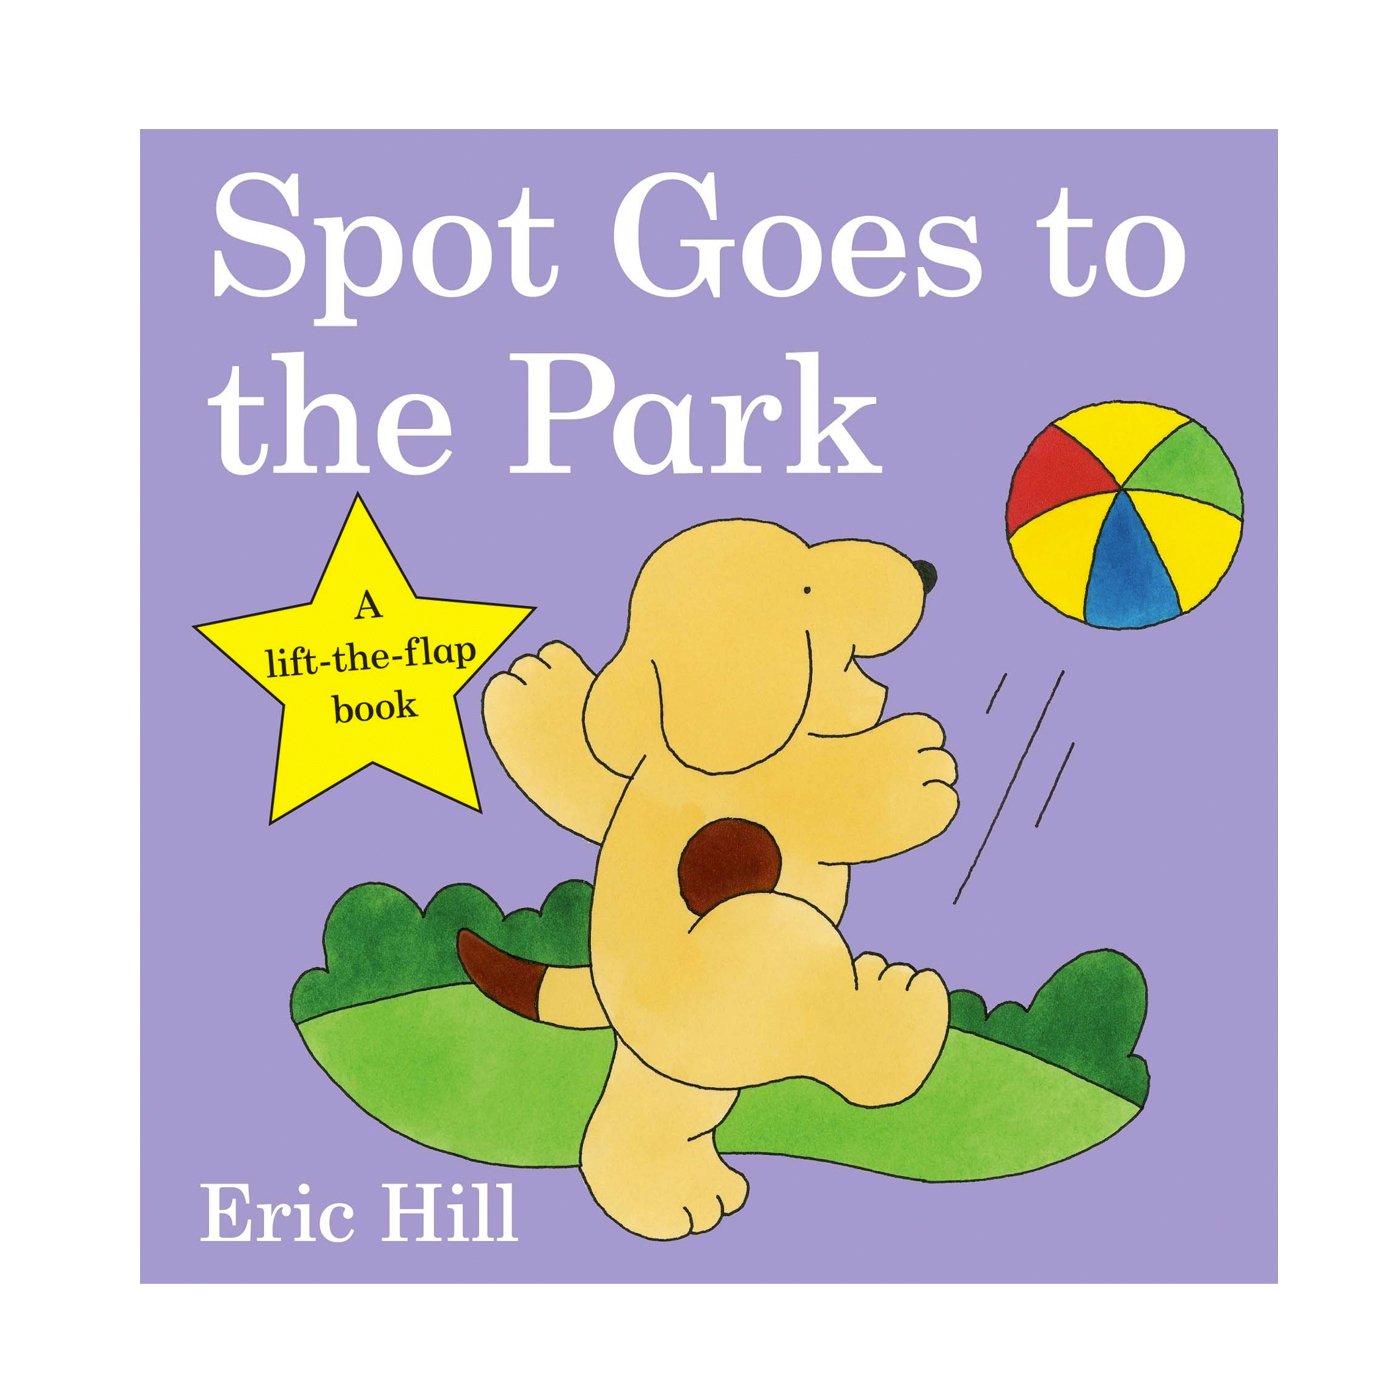  Spot Goes To The Park